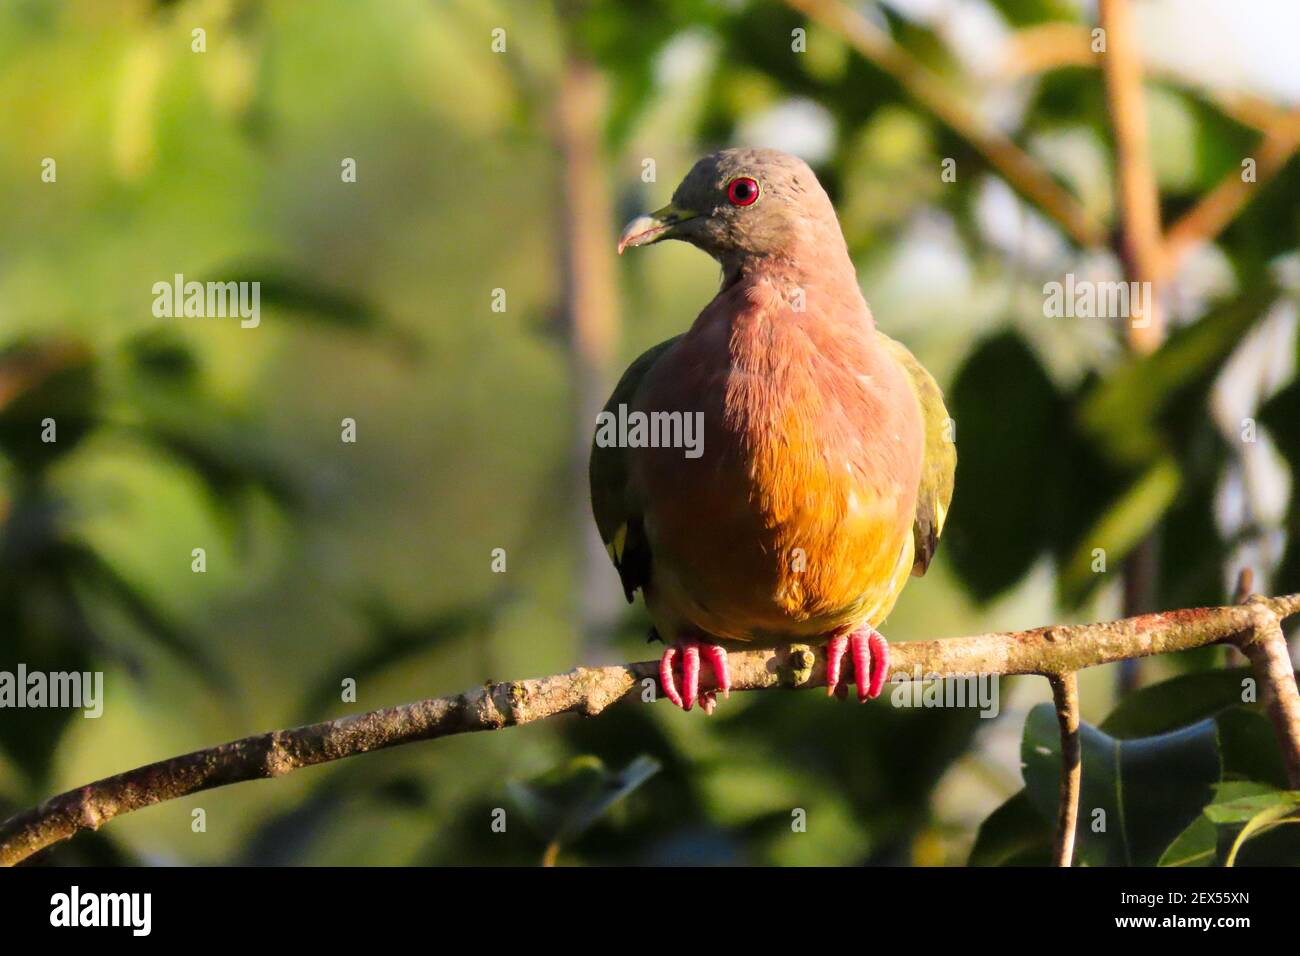 Pink-necked green pigeon in Singapore rain forest. Stock Photo